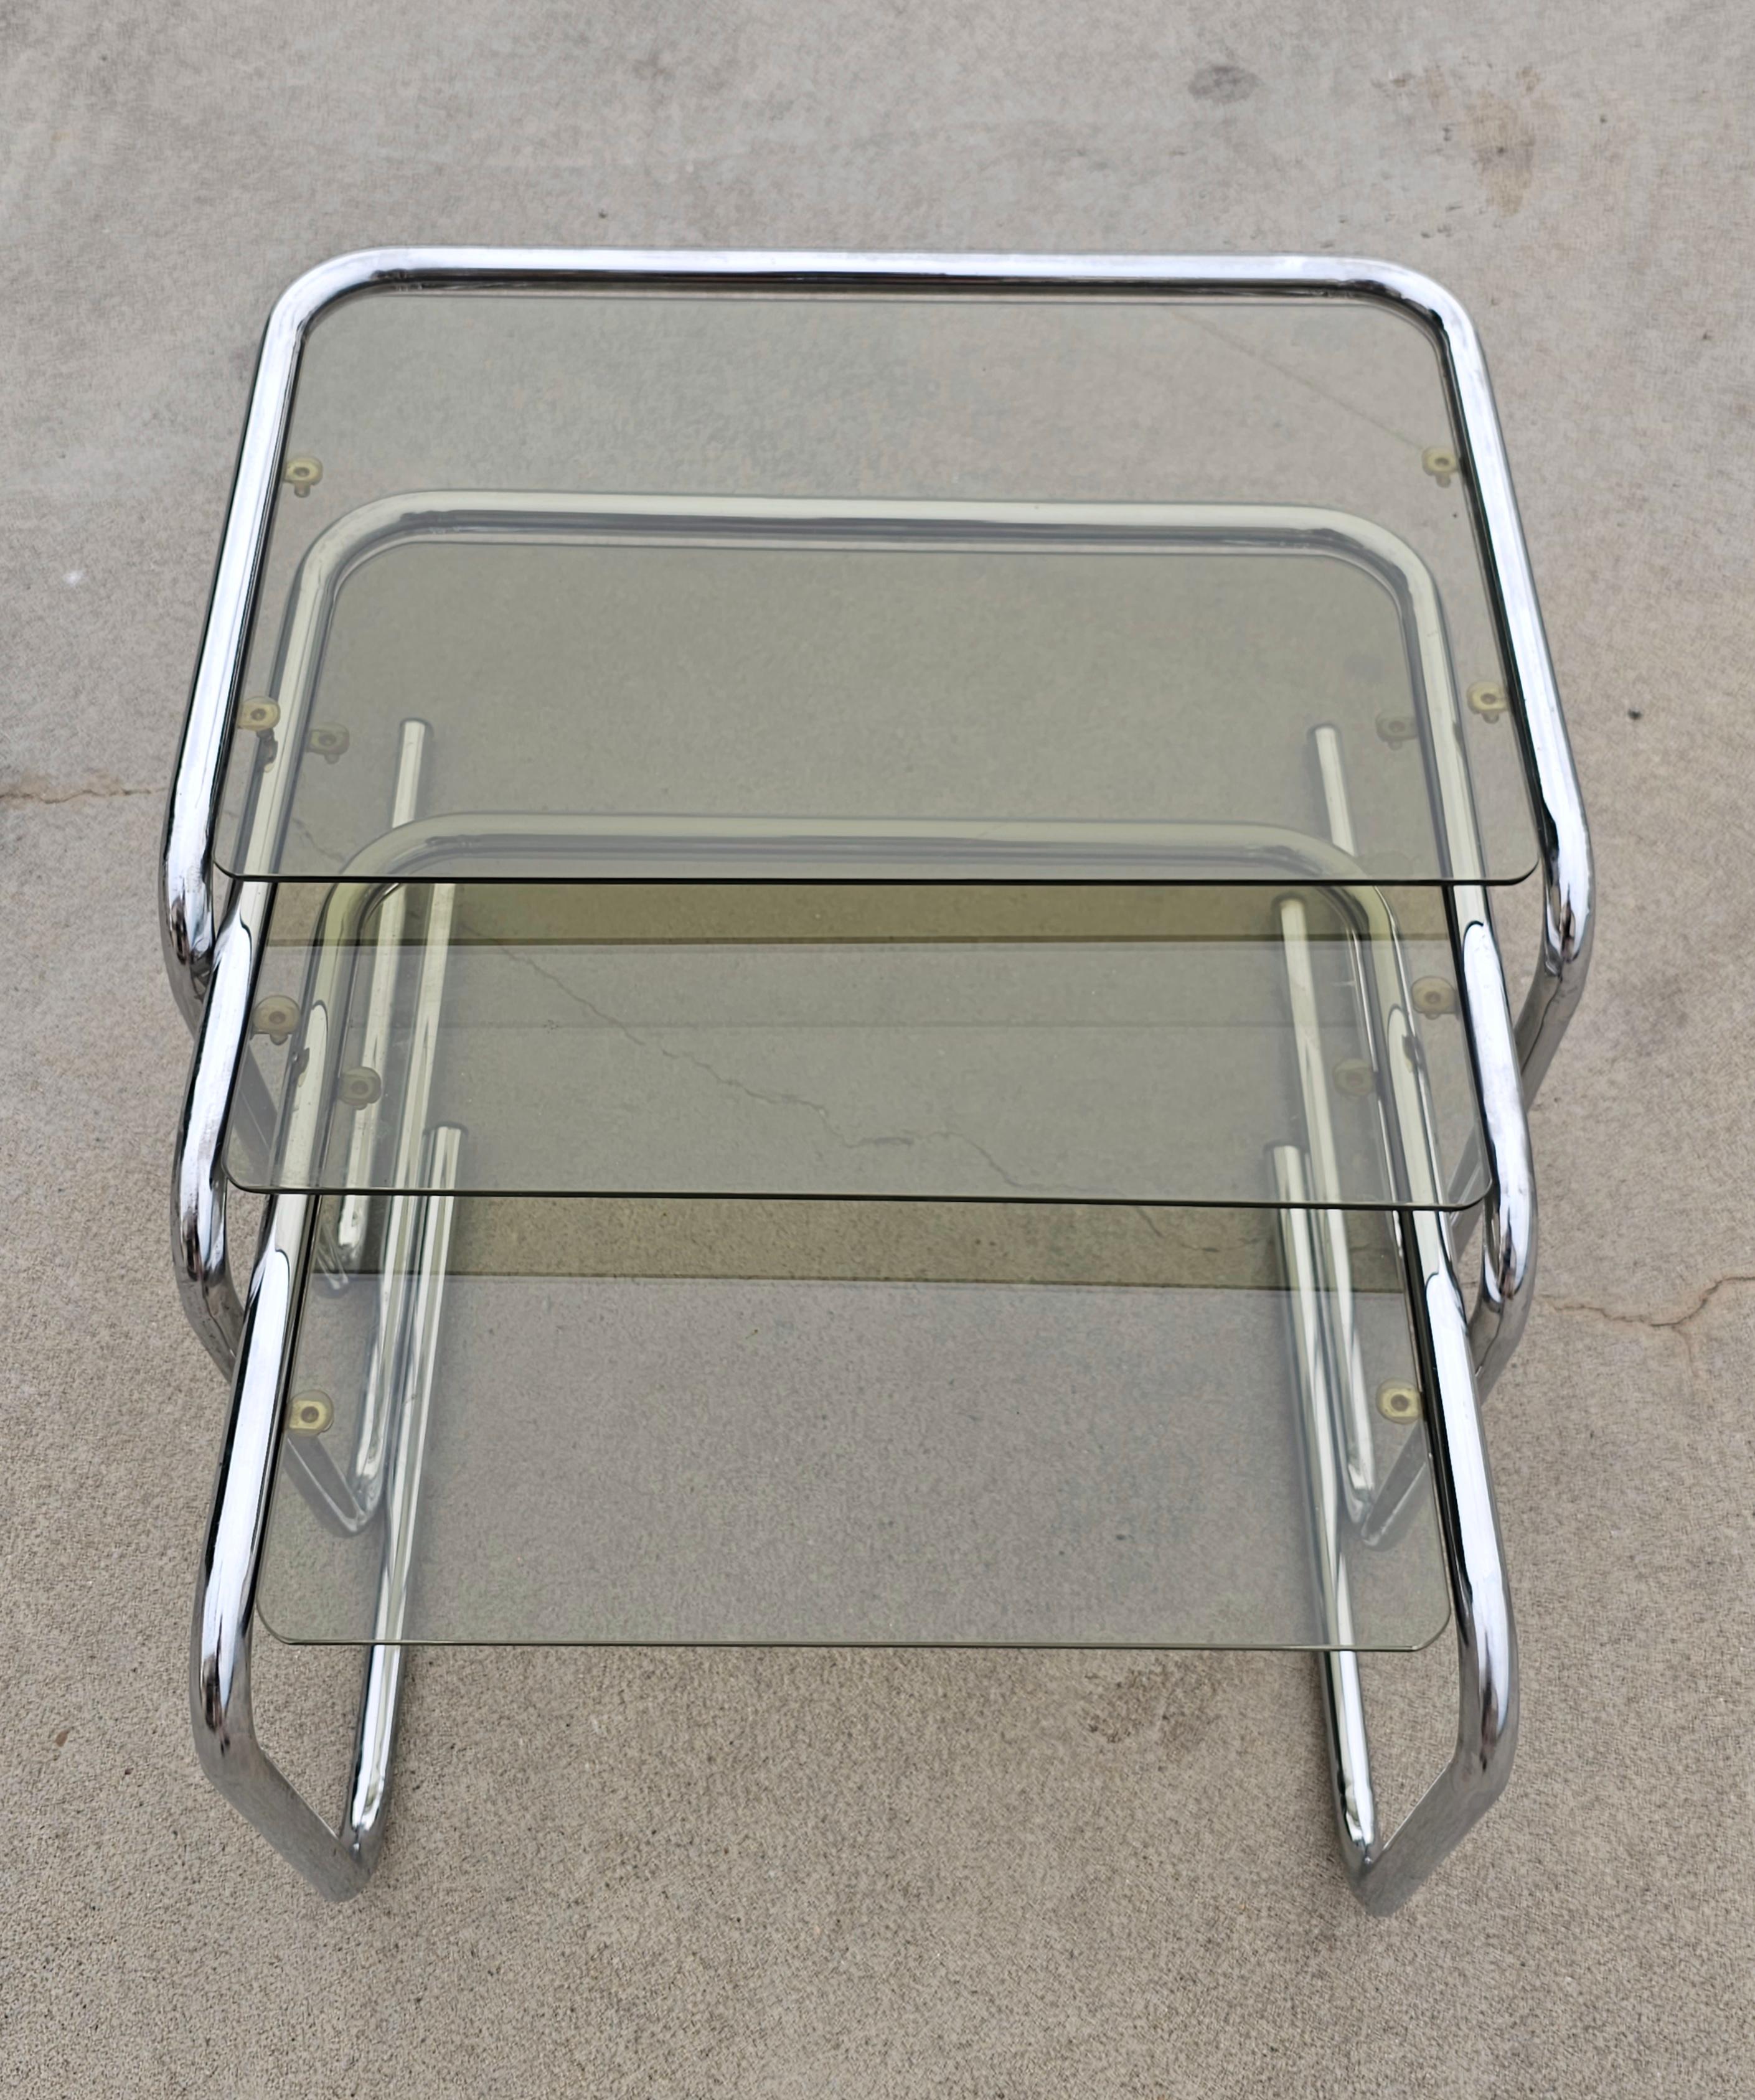 Milo Baughman style Chrome and Smoked Glass Nesting Tables, Italy 1970s For Sale 4